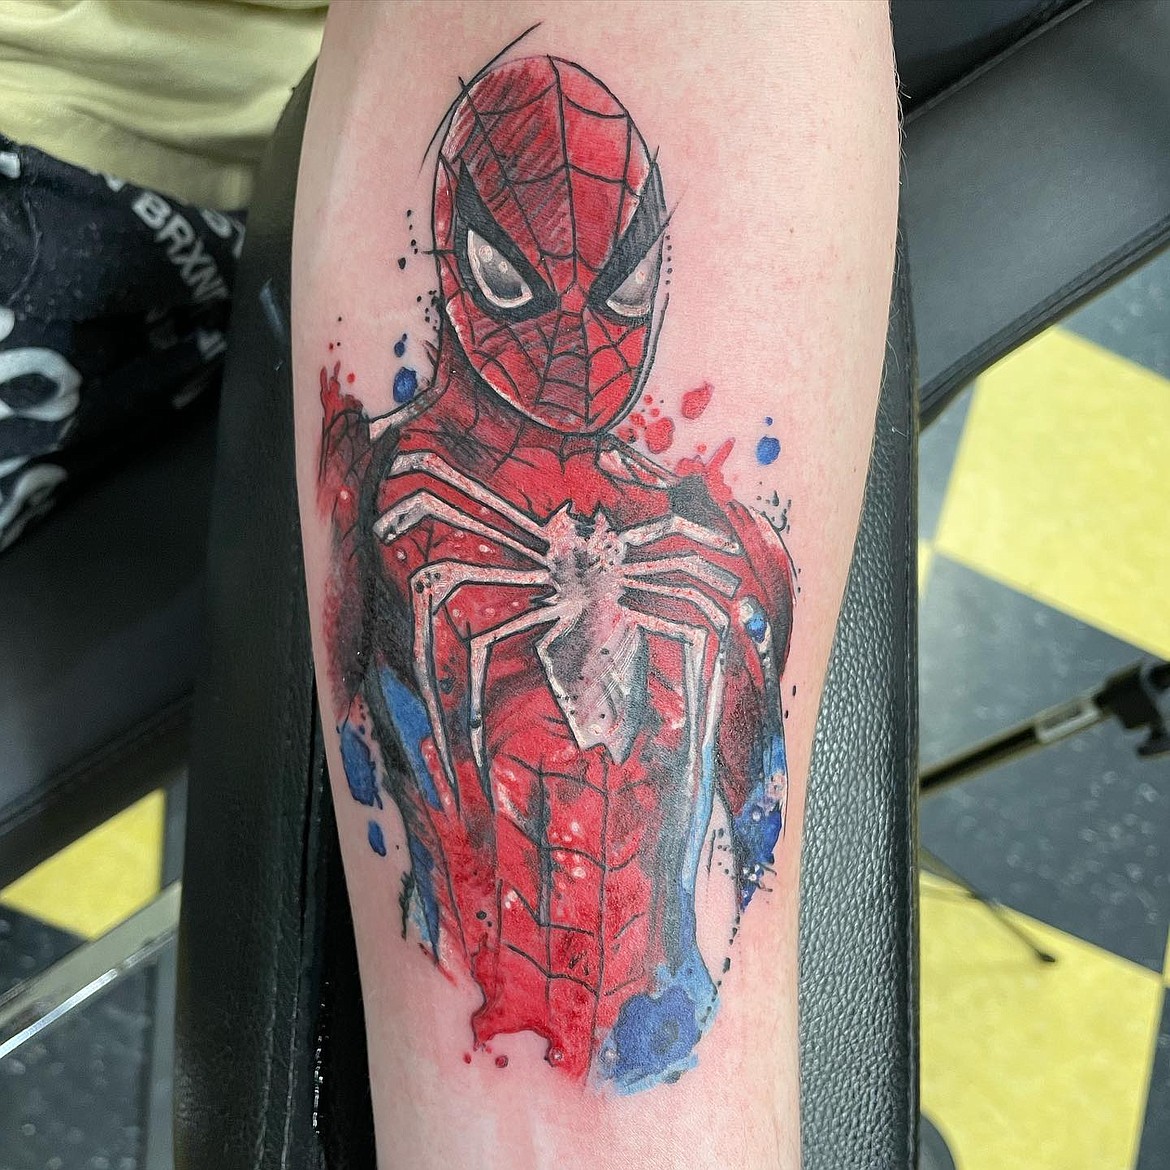 A tattoo completed on Jan. 3 of a watercolor Spiderman.